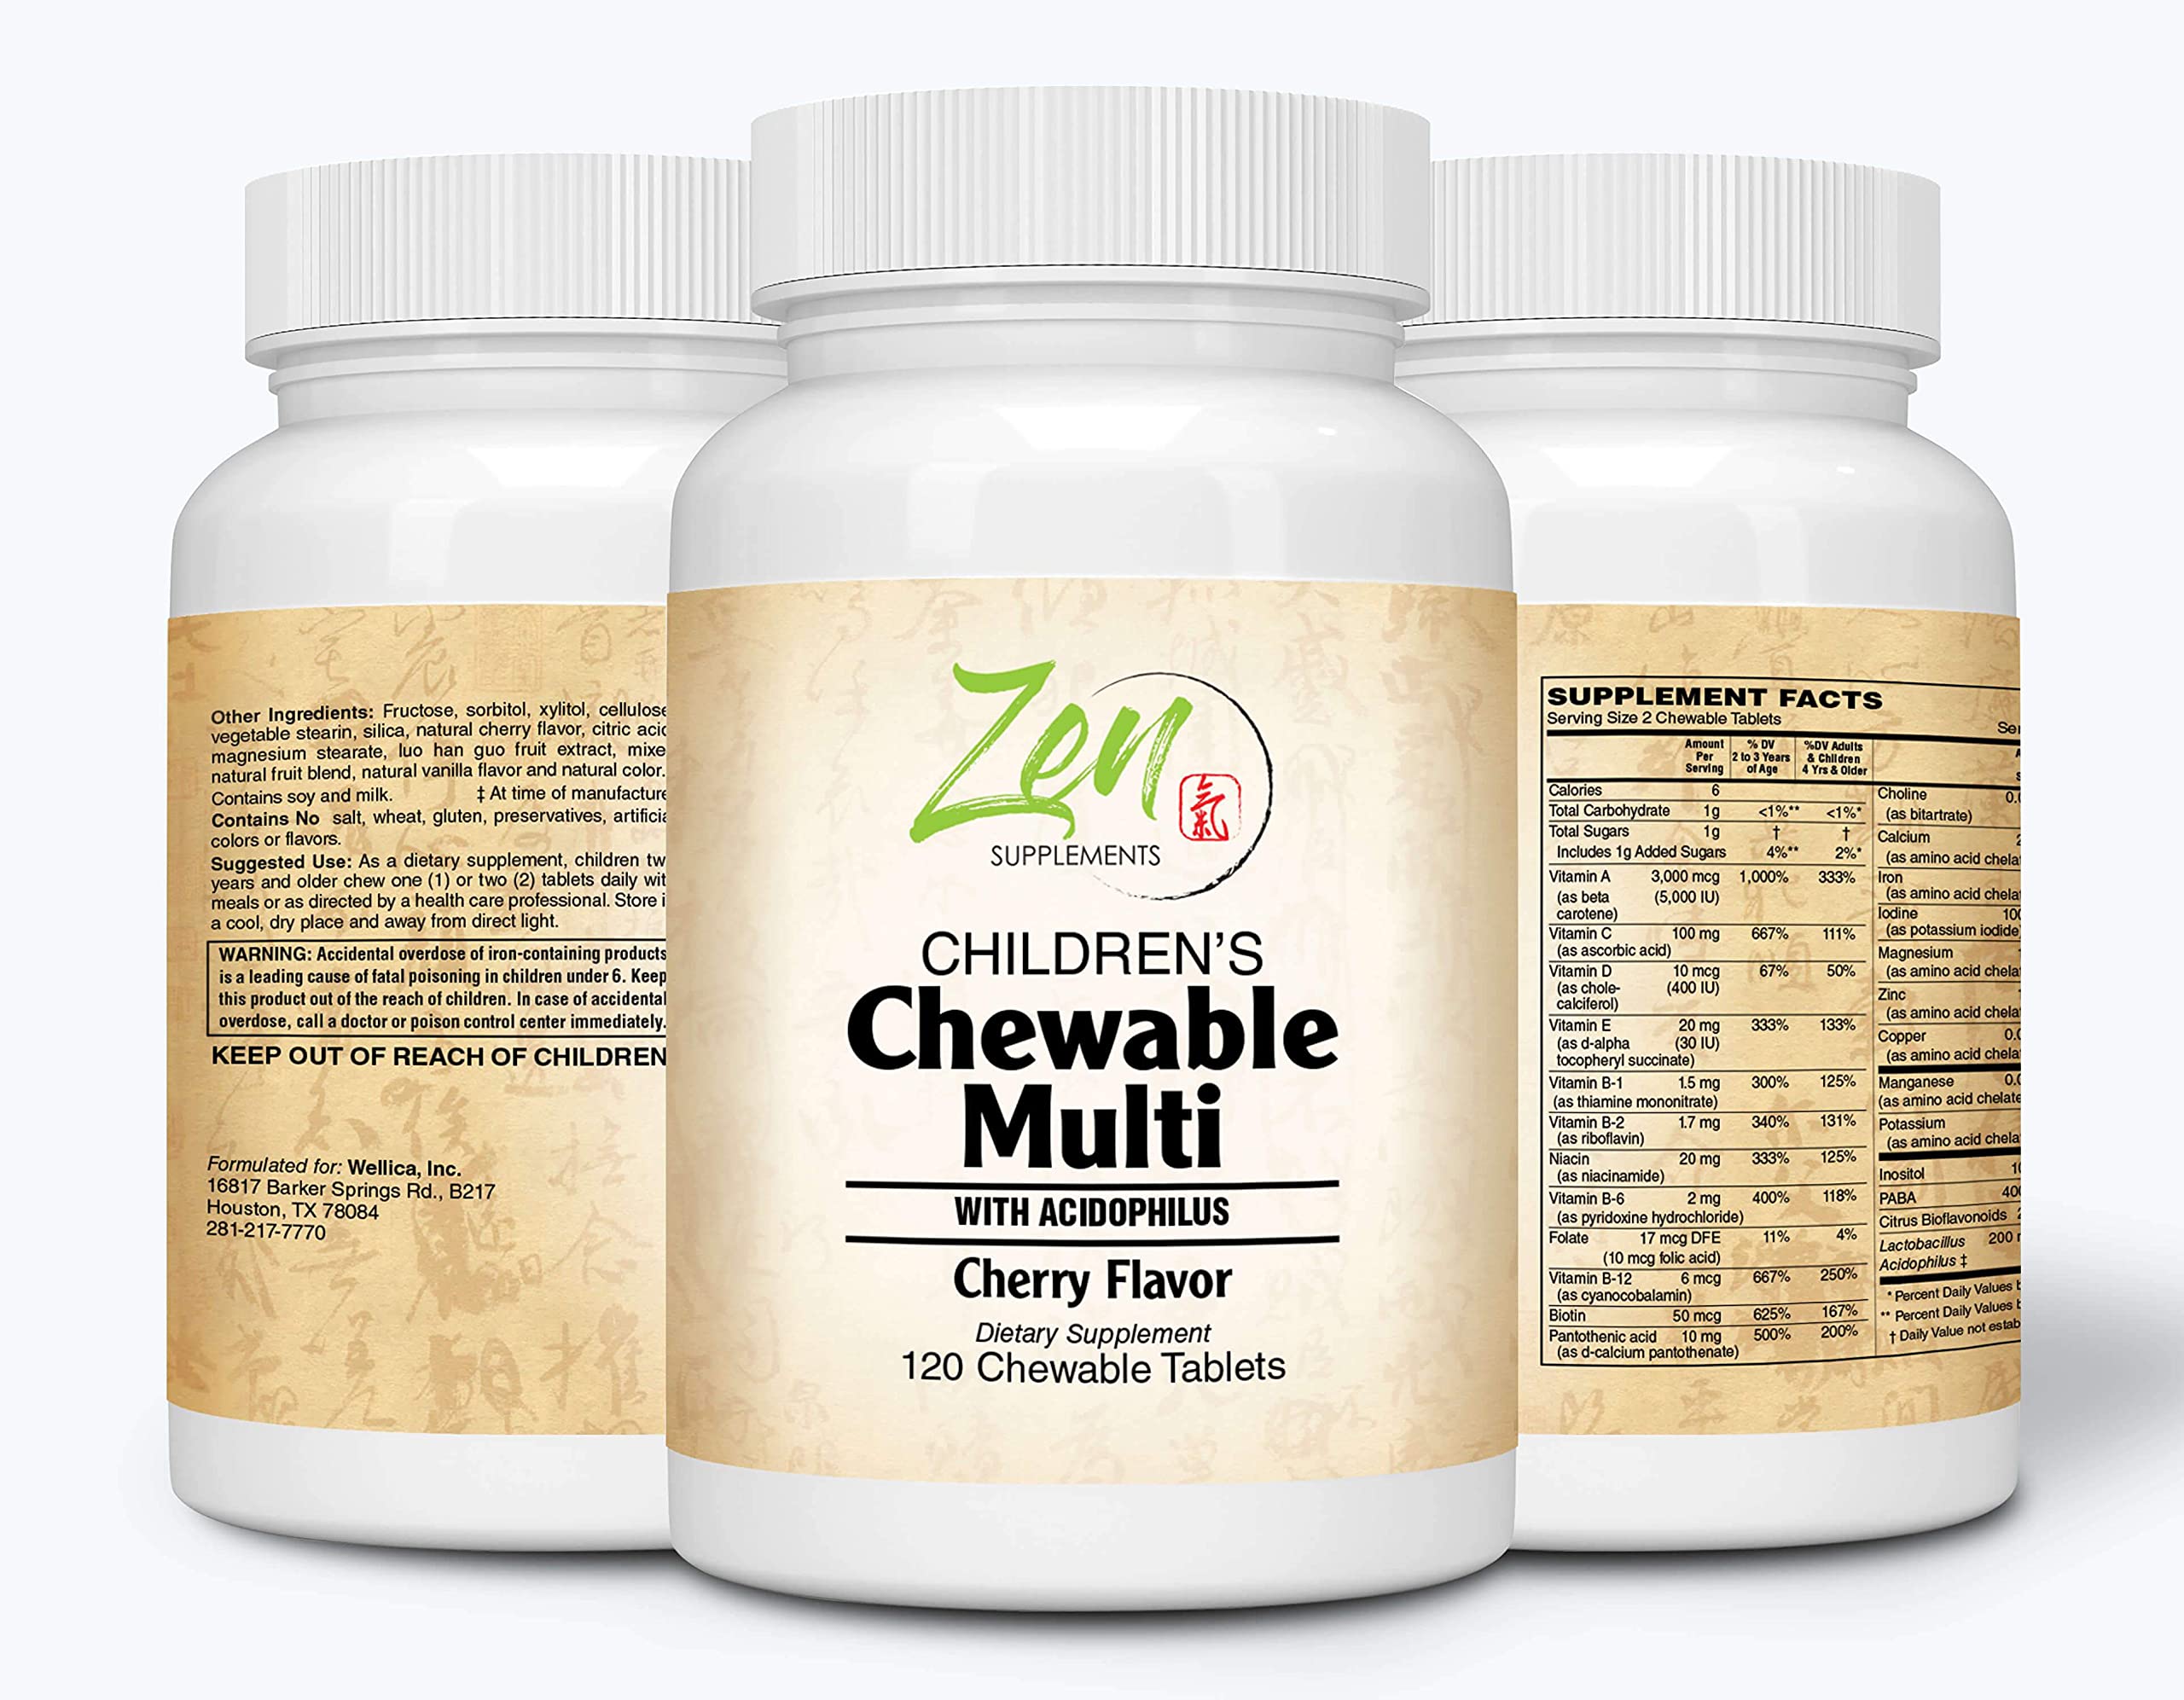 Zen Supplements - Children's Chewable Multi-Vitamin with Acidophilus Cherry Flavored 120-Tabs - The Children's Multivitamin You Won't Have to Beg The Kids to take